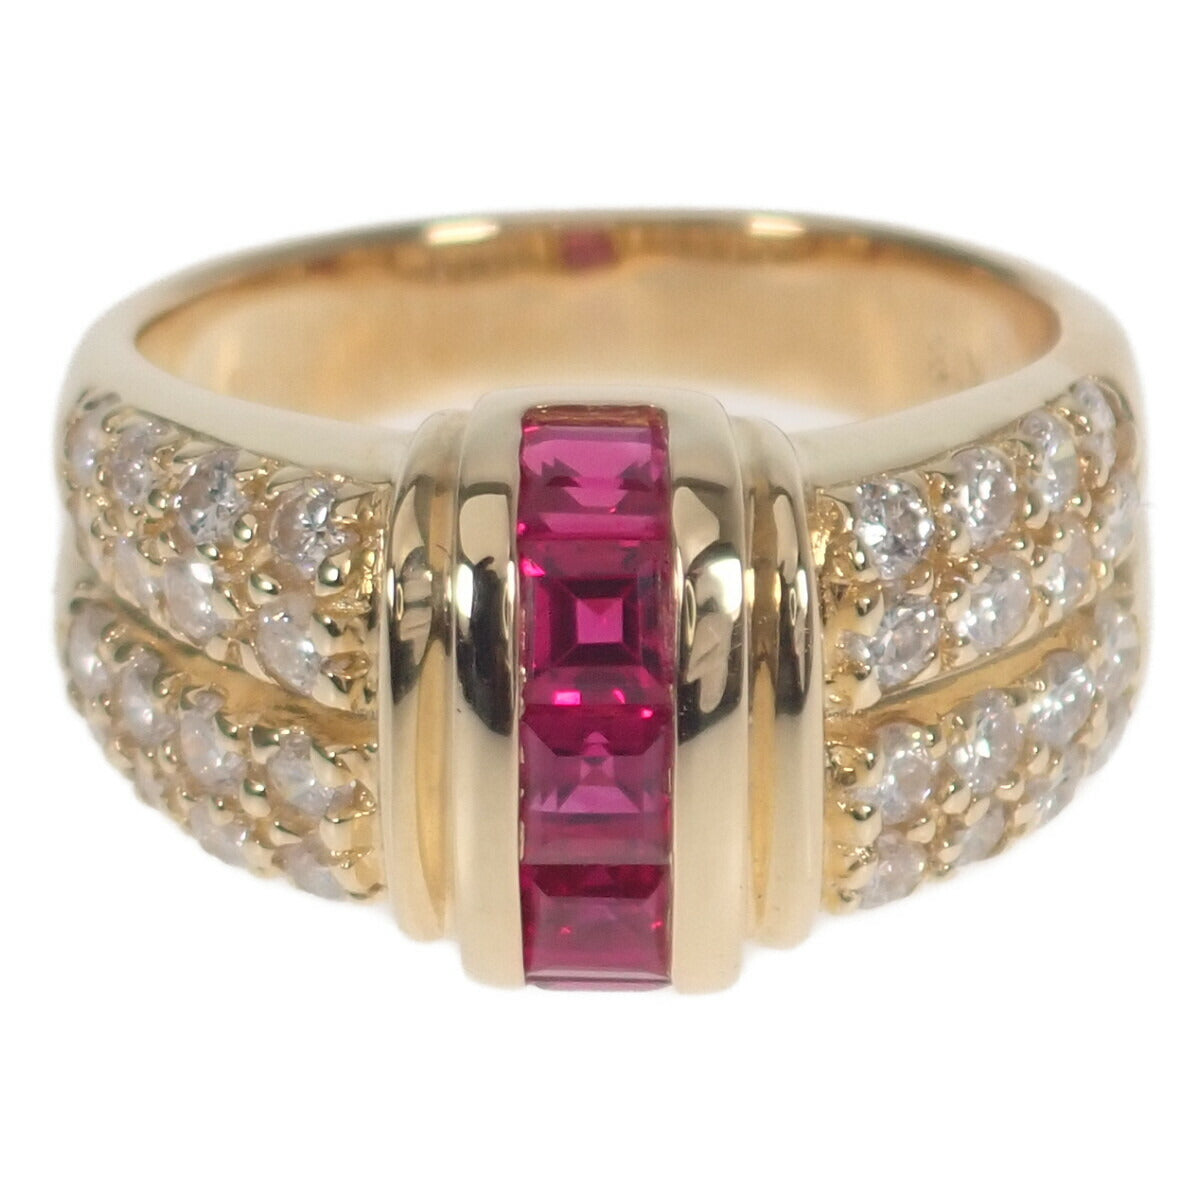 [LuxUness]  K18 Yellow Gold Ruby Diamond Ring with 1.11ct Ruby and 0.85ct Diamond for Women in Excellent condition